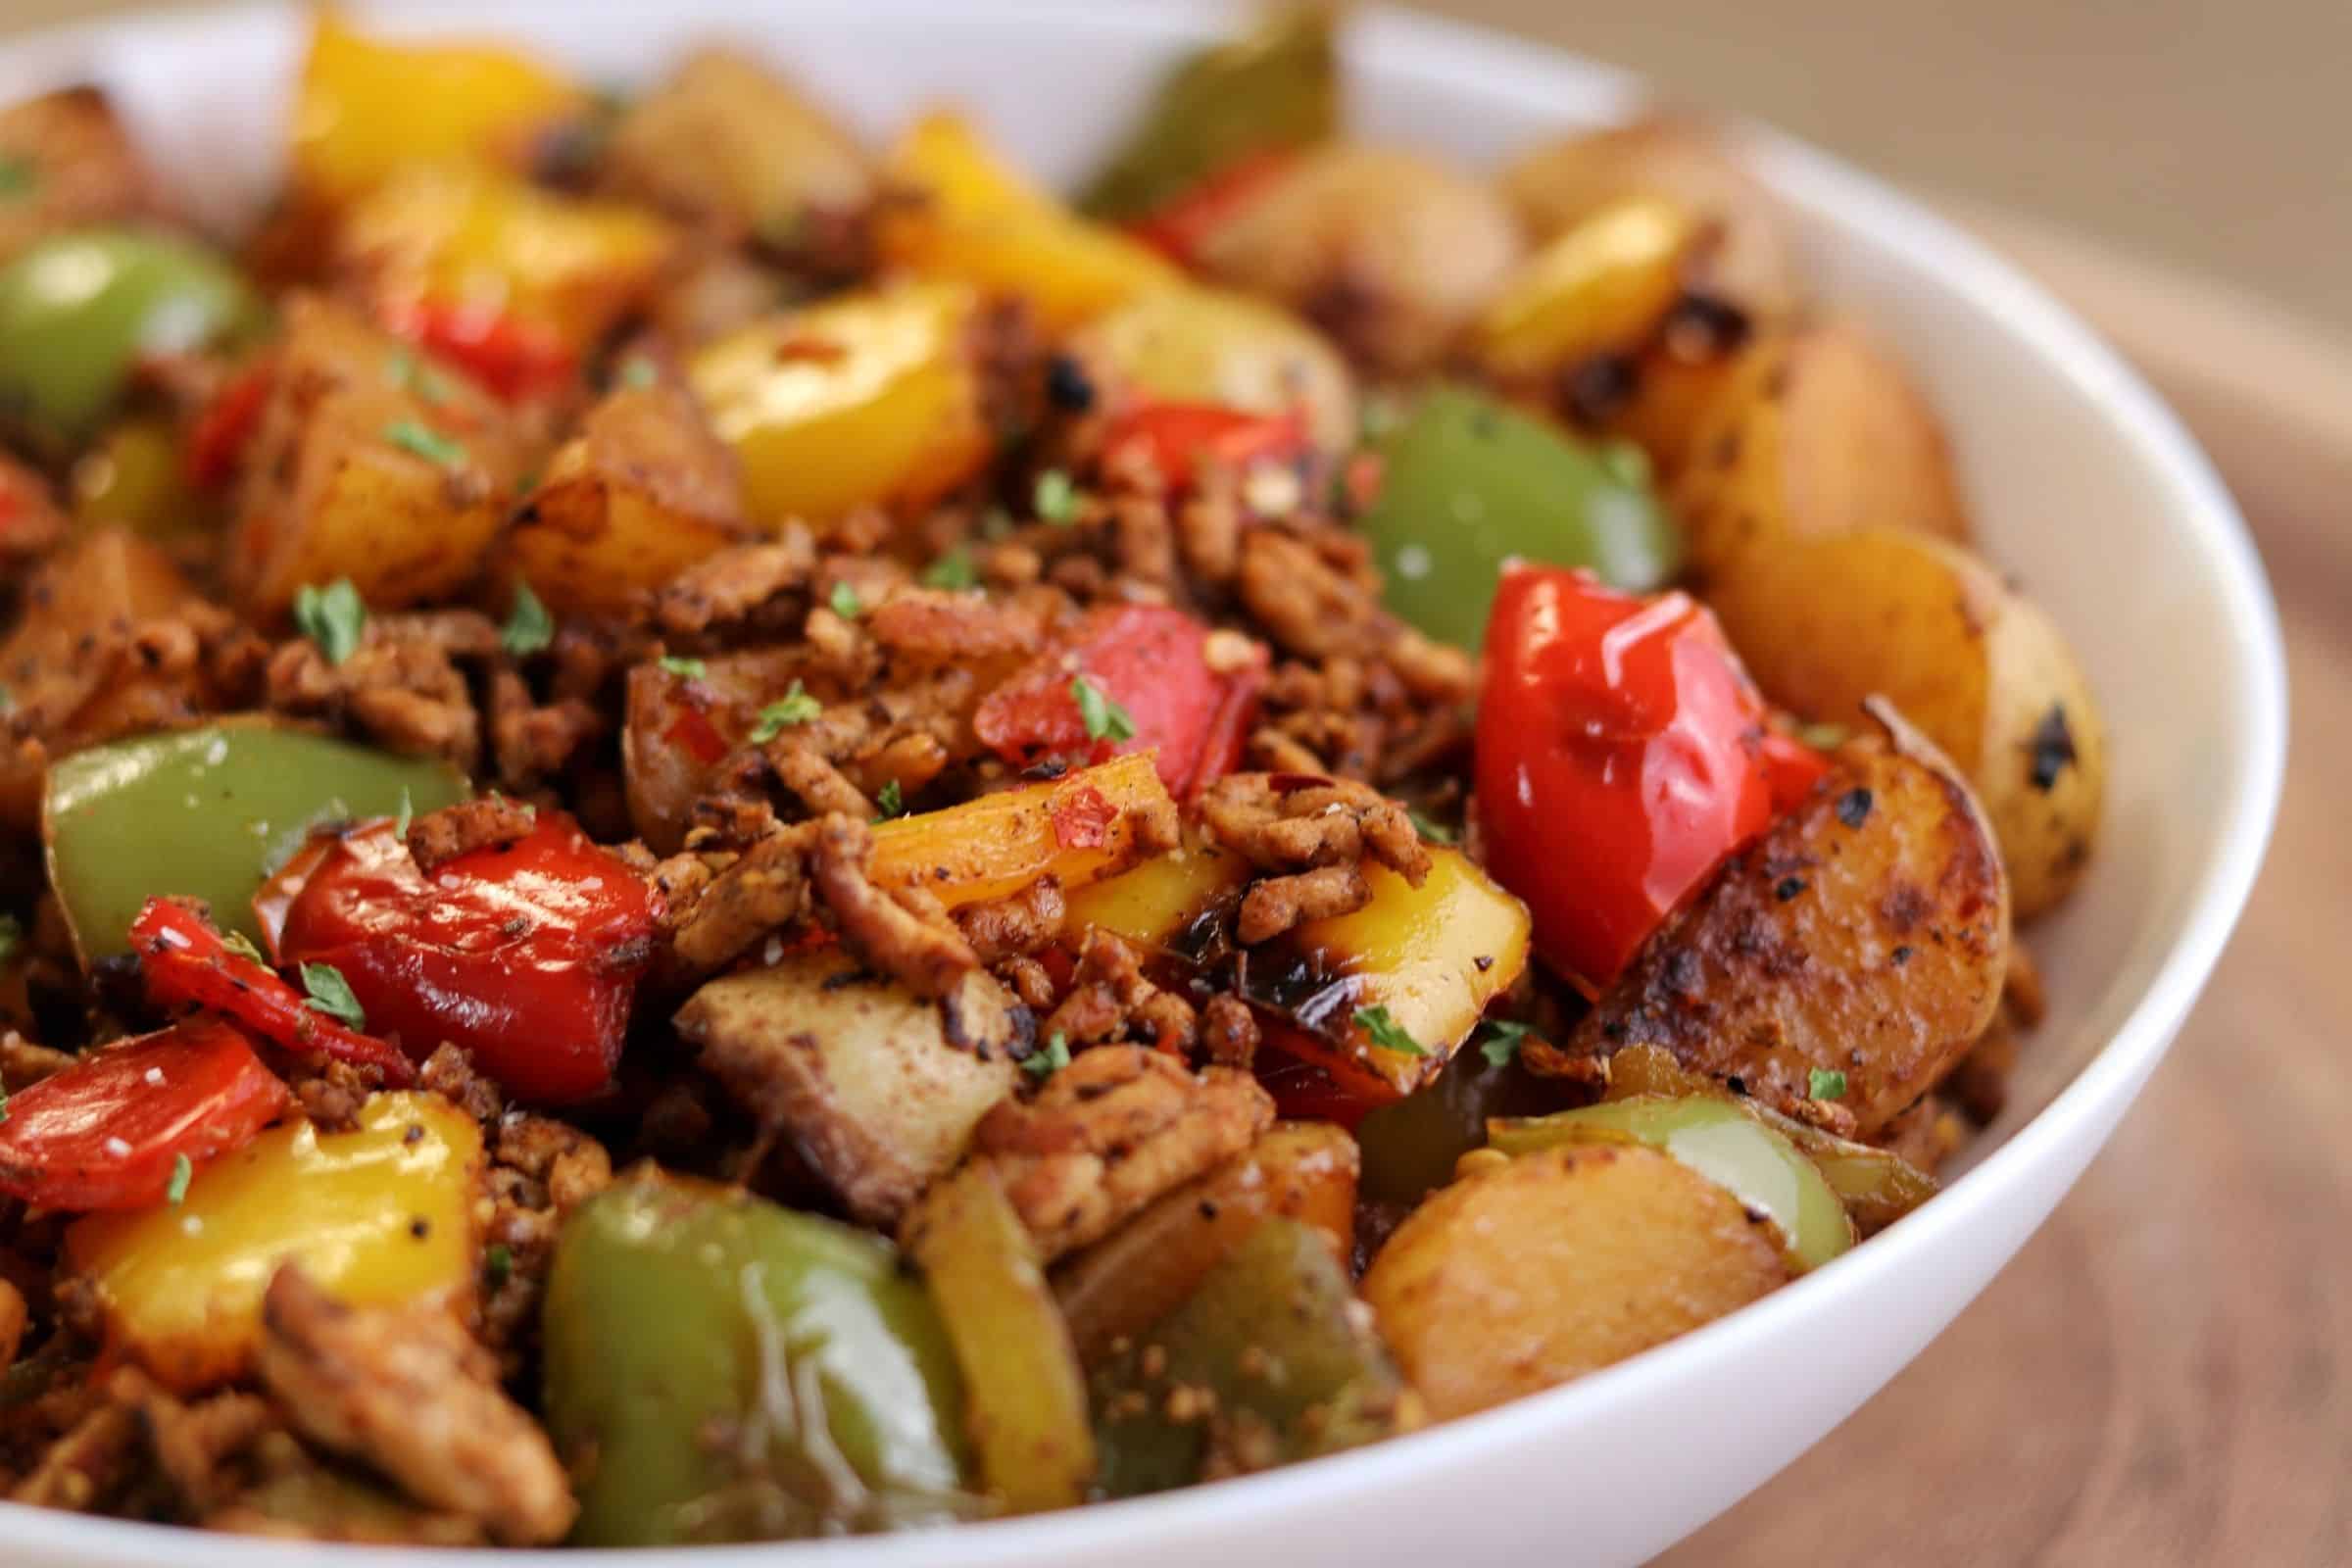 Healthy Turkey Sausage Breakfast Skillet with Potatoes and Peppers